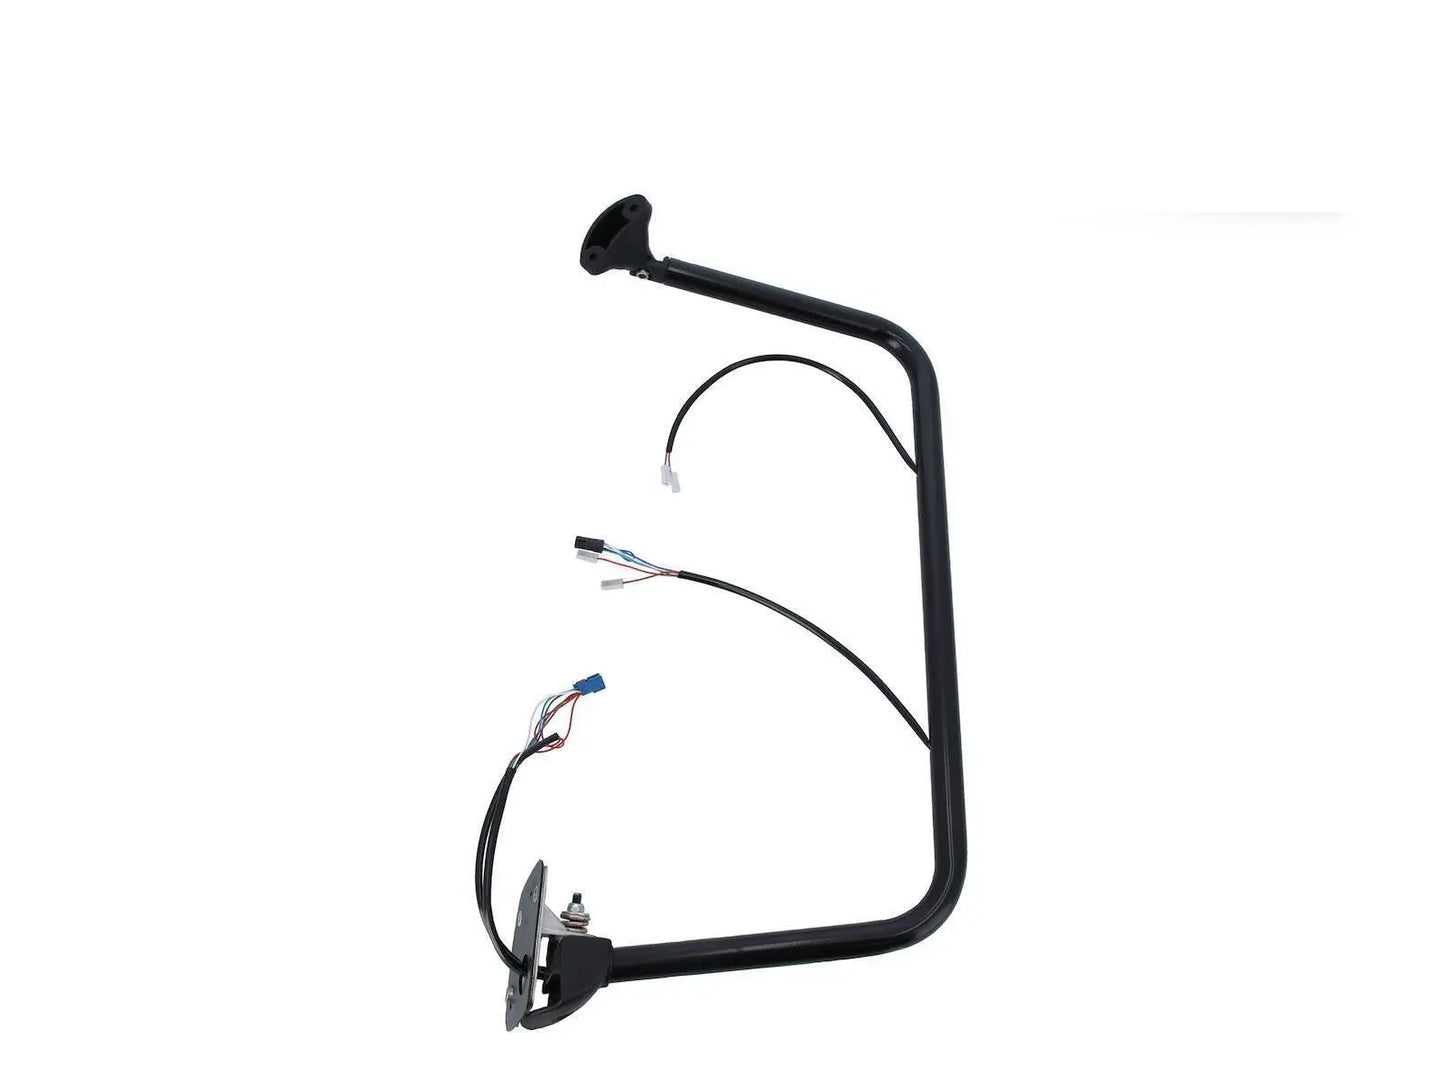 CHINA Factory Wholesale 9738100414 A9738100414 9738100314 A9738100314 Arm Mirror Right Left For MERCEDES BENZ FANCHANTS China Auto Parts Wholesales